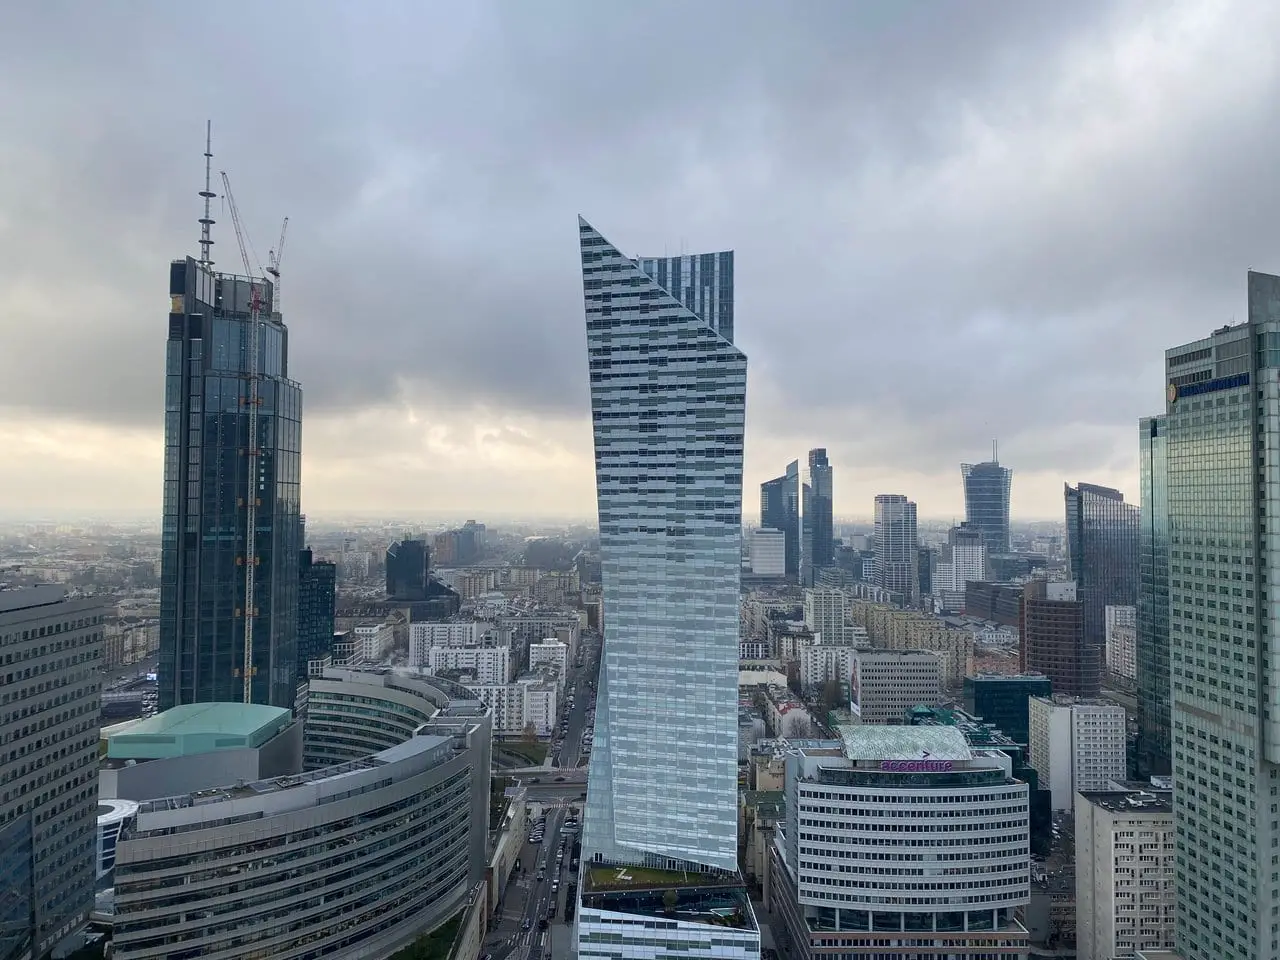 View over the Warsaw skyline